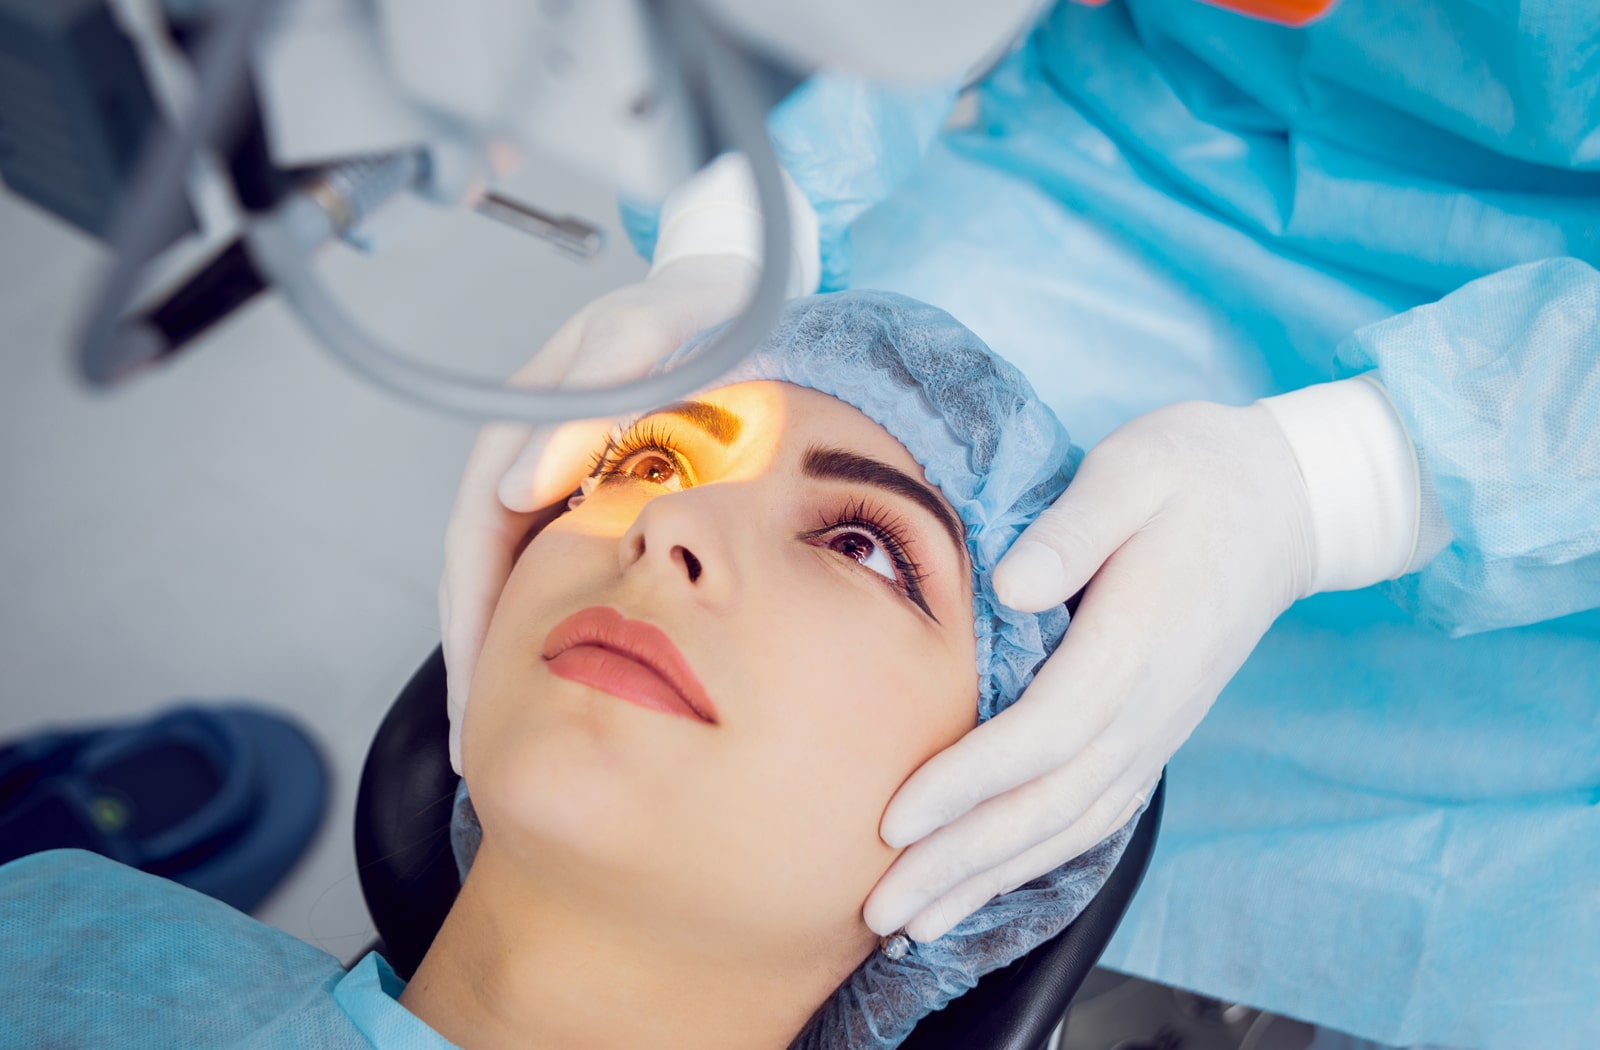 A woman about to undergo laser eye surgery